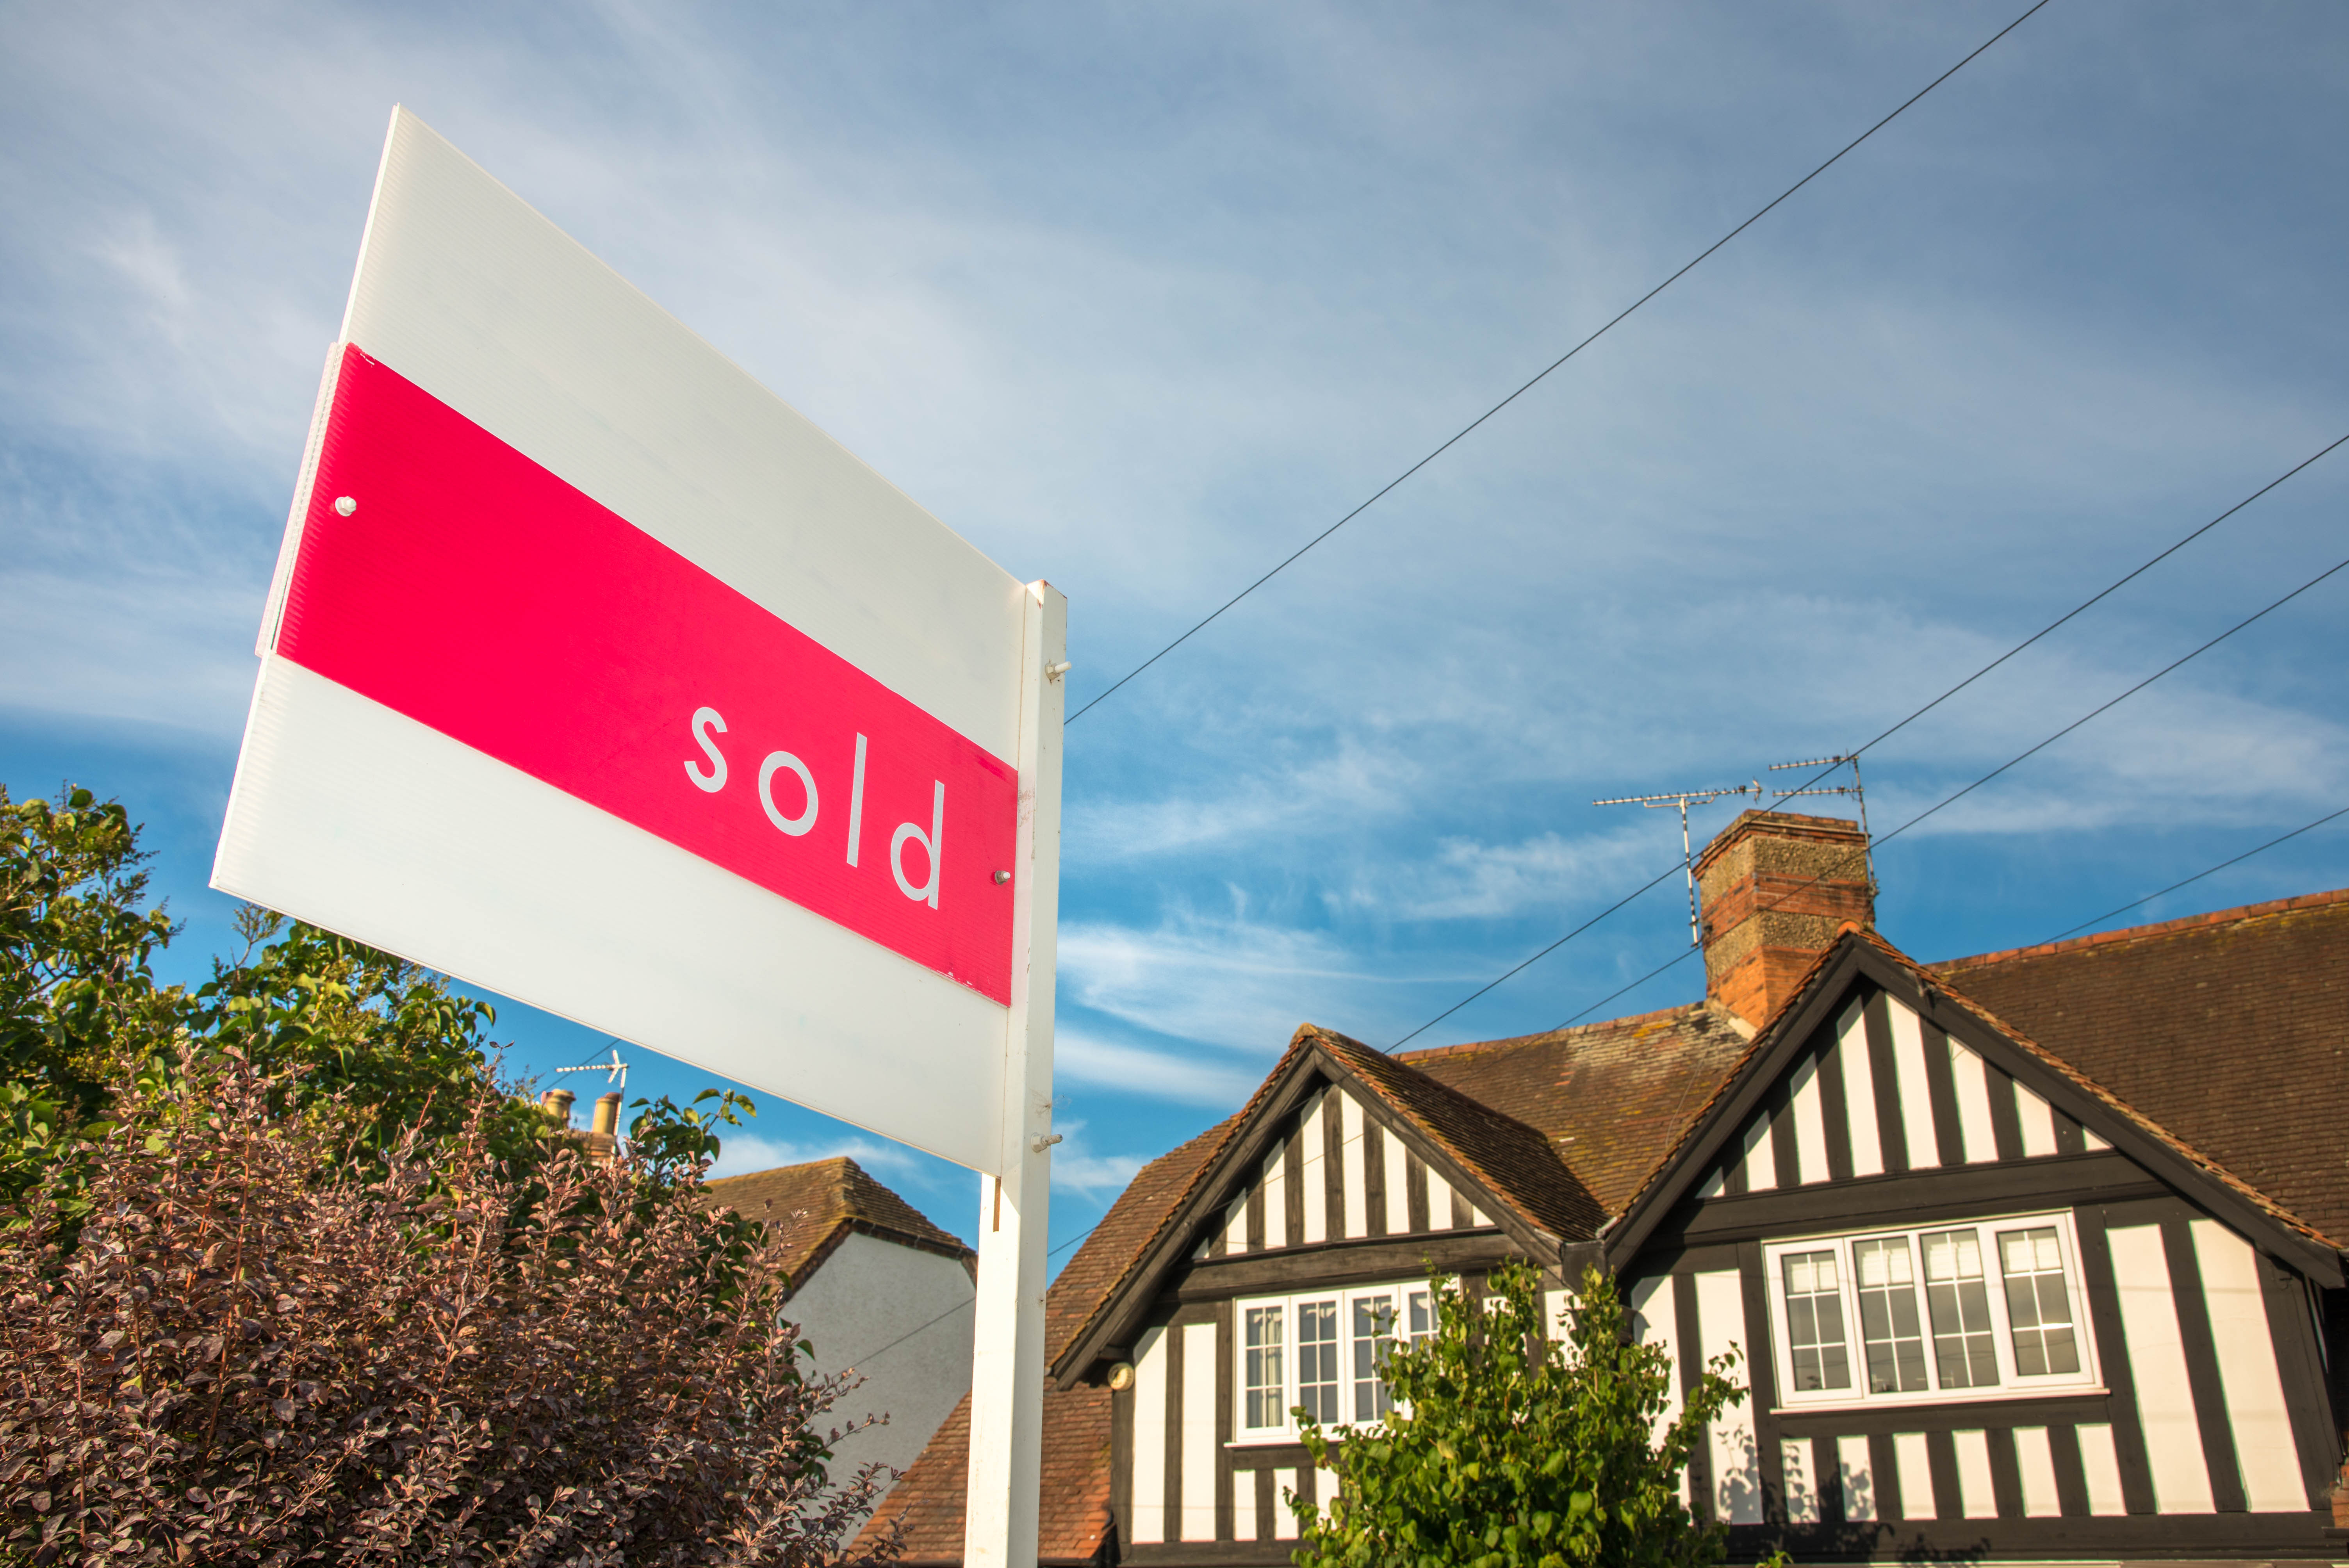 Knight Frank: Rebound in property market activity continuing